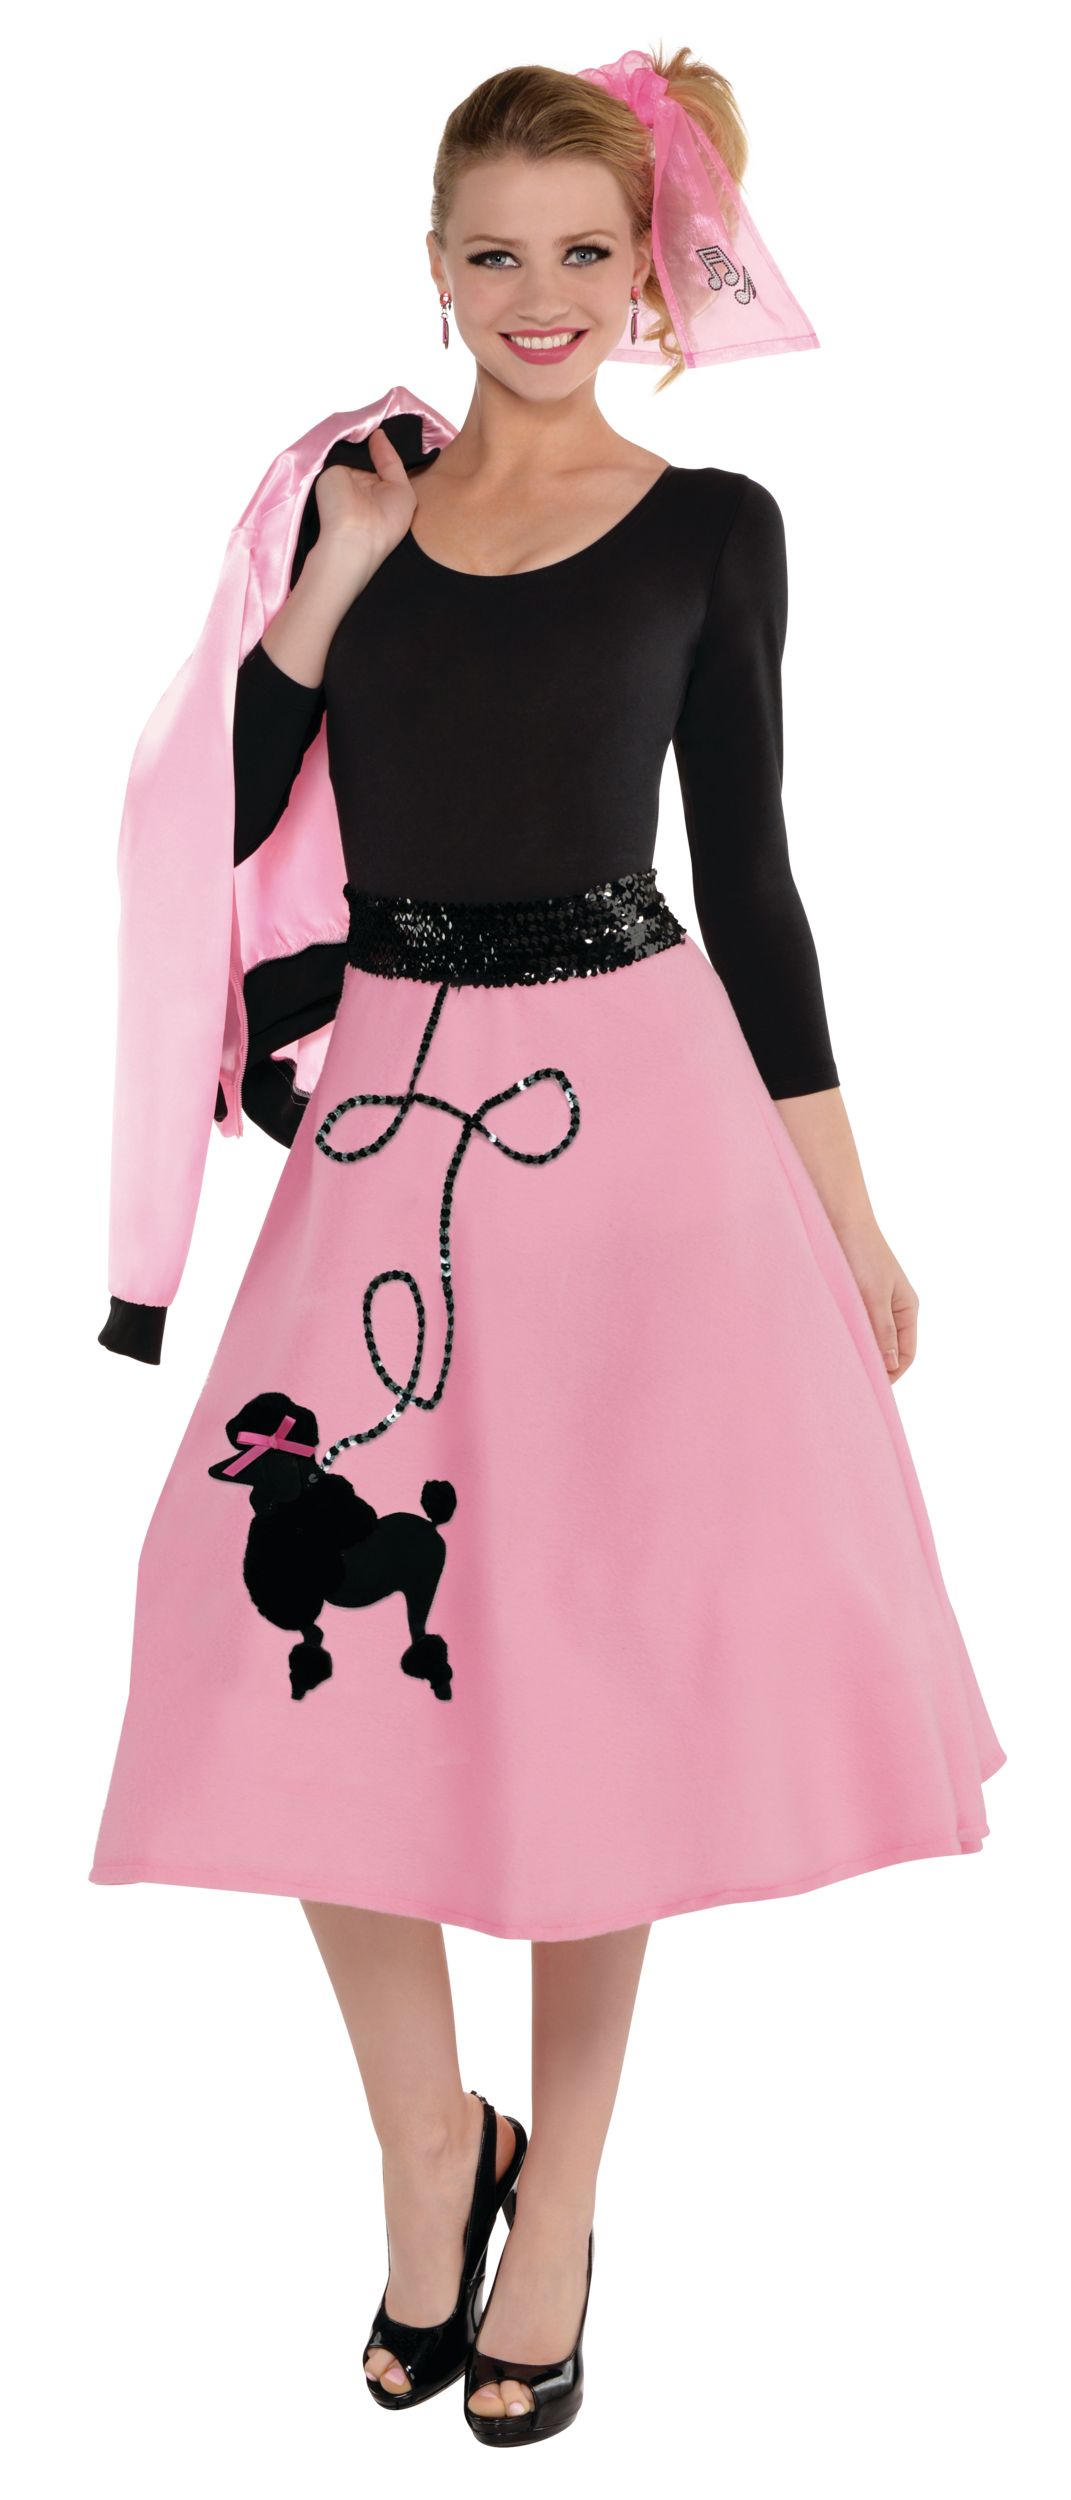 Brand New Grease 50's Sweetheart Poodle Skirt Plus Size Adult